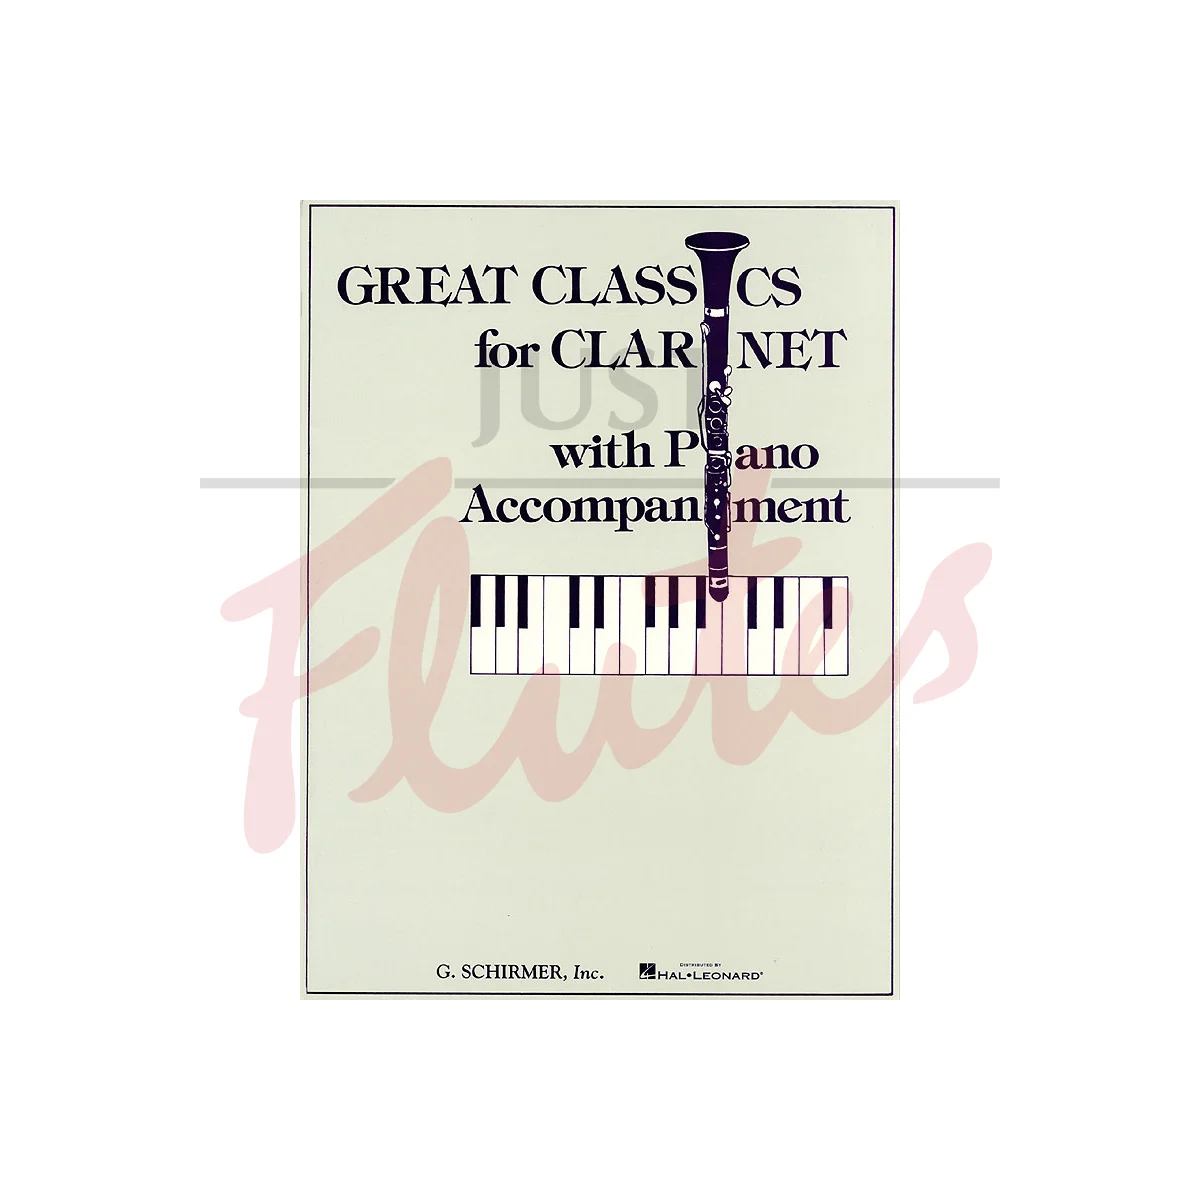 Great Classics for Clarinet: 3 Centuries of Music for Clarinet and Piano